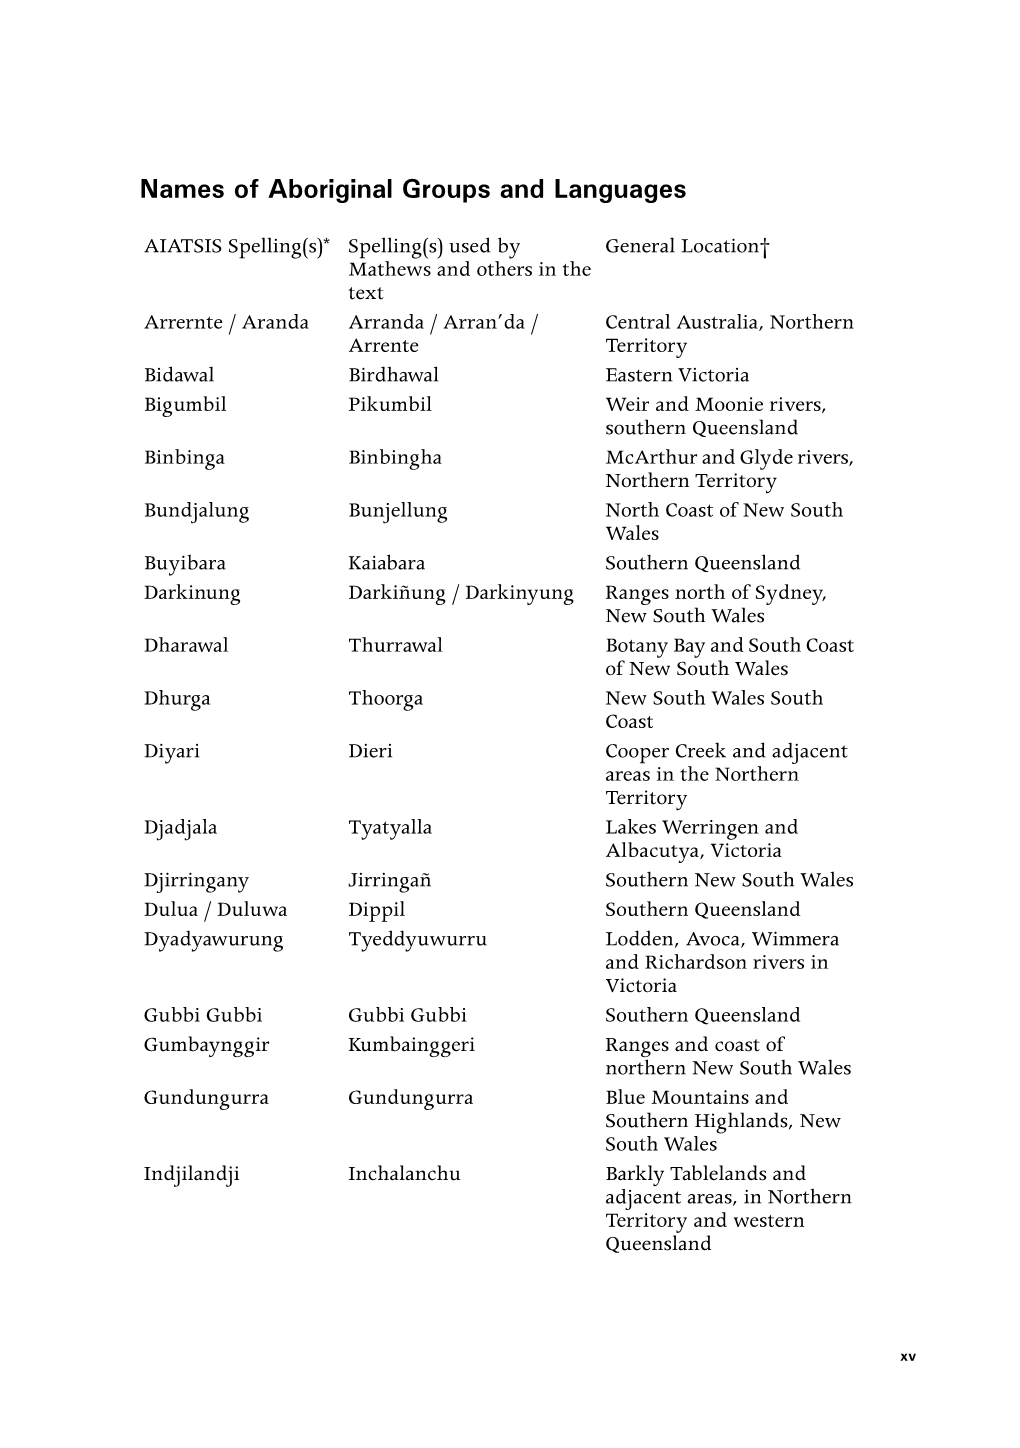 Names of Aboriginal Groups and Languages